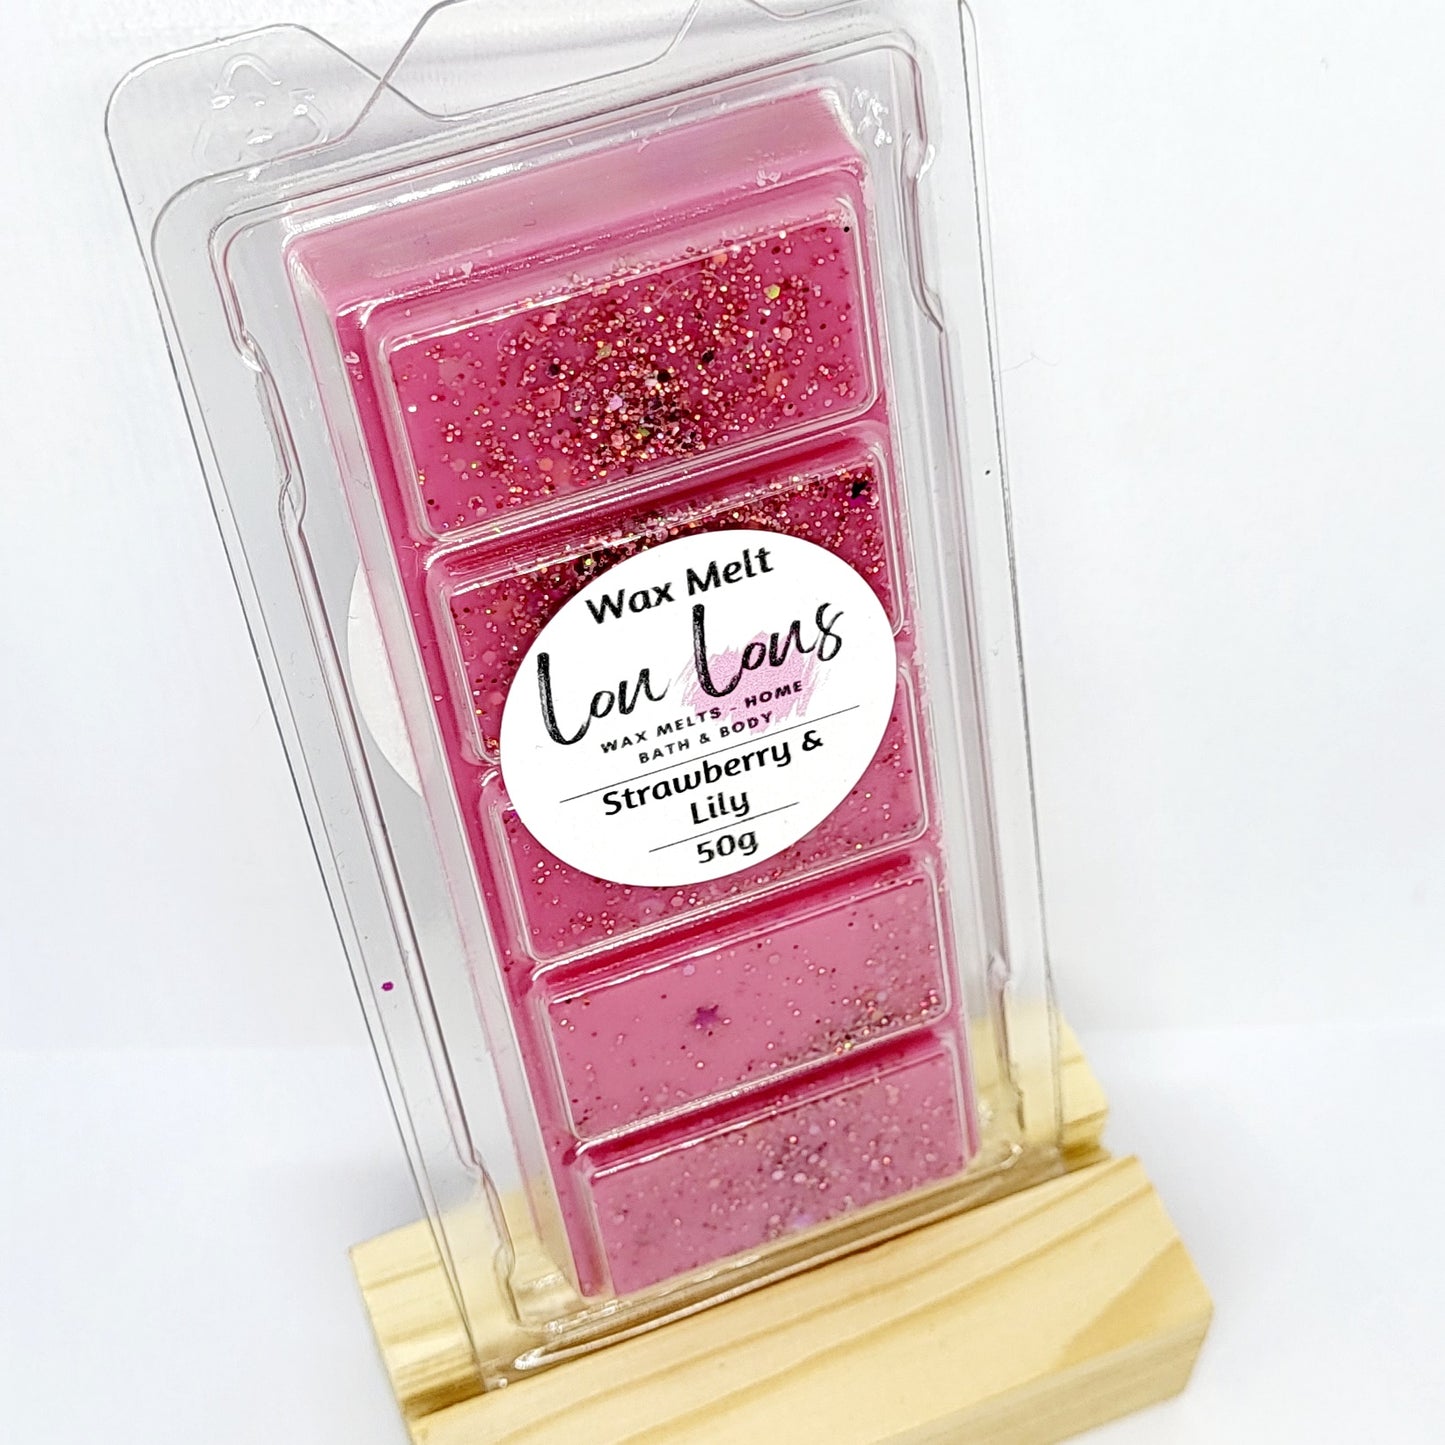 Wax melt snap bar scented in strawberry & lily